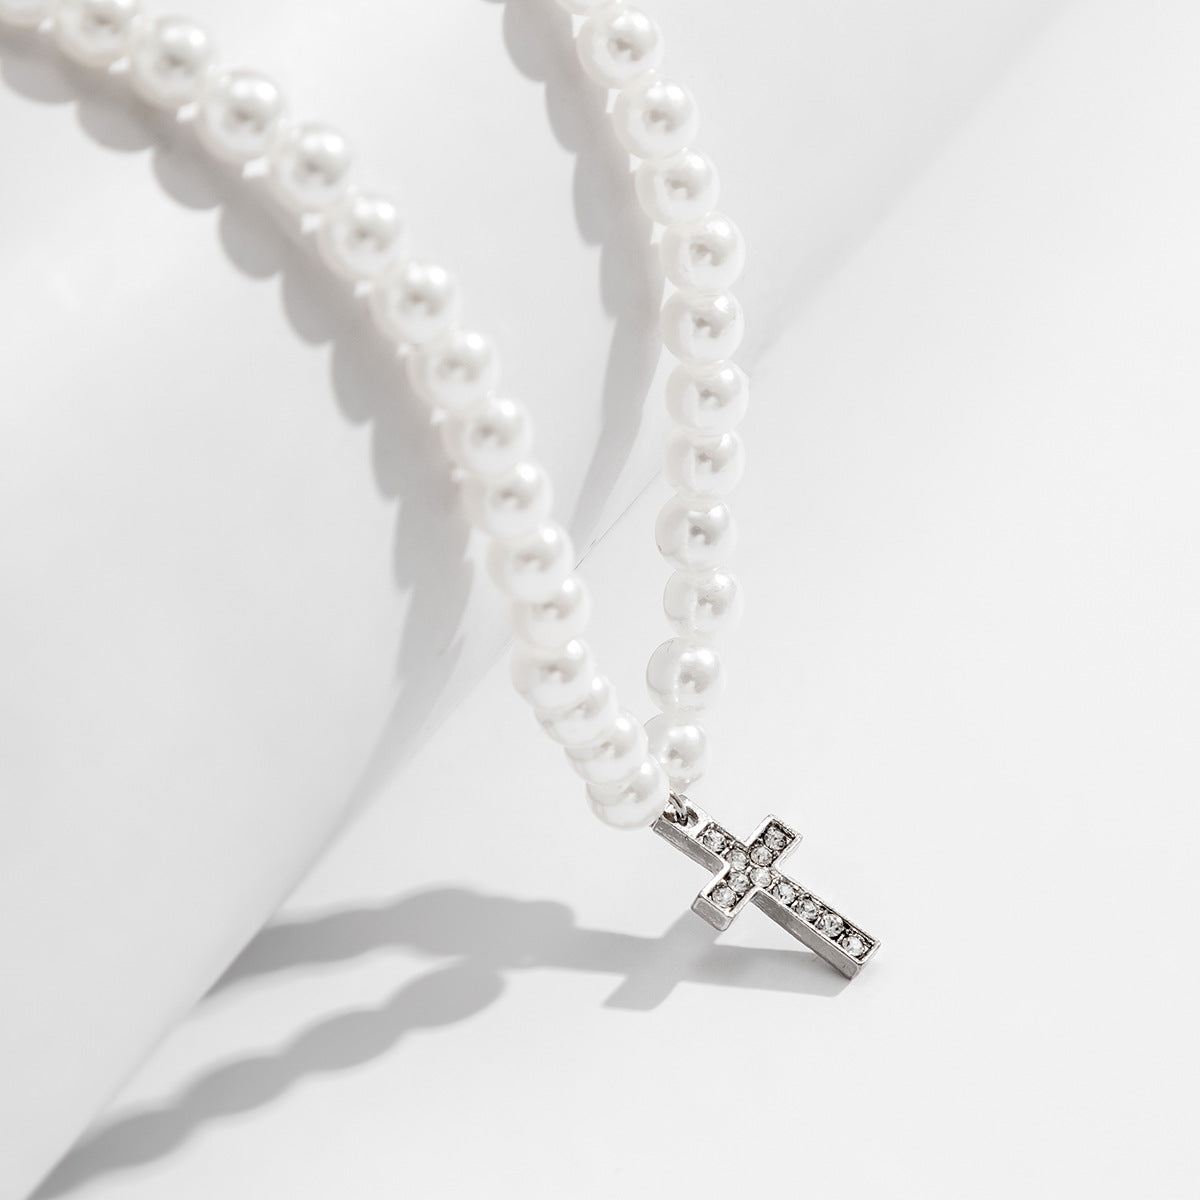 Fashionable simple hip-hop style diamond cross with pearl pendant necklace